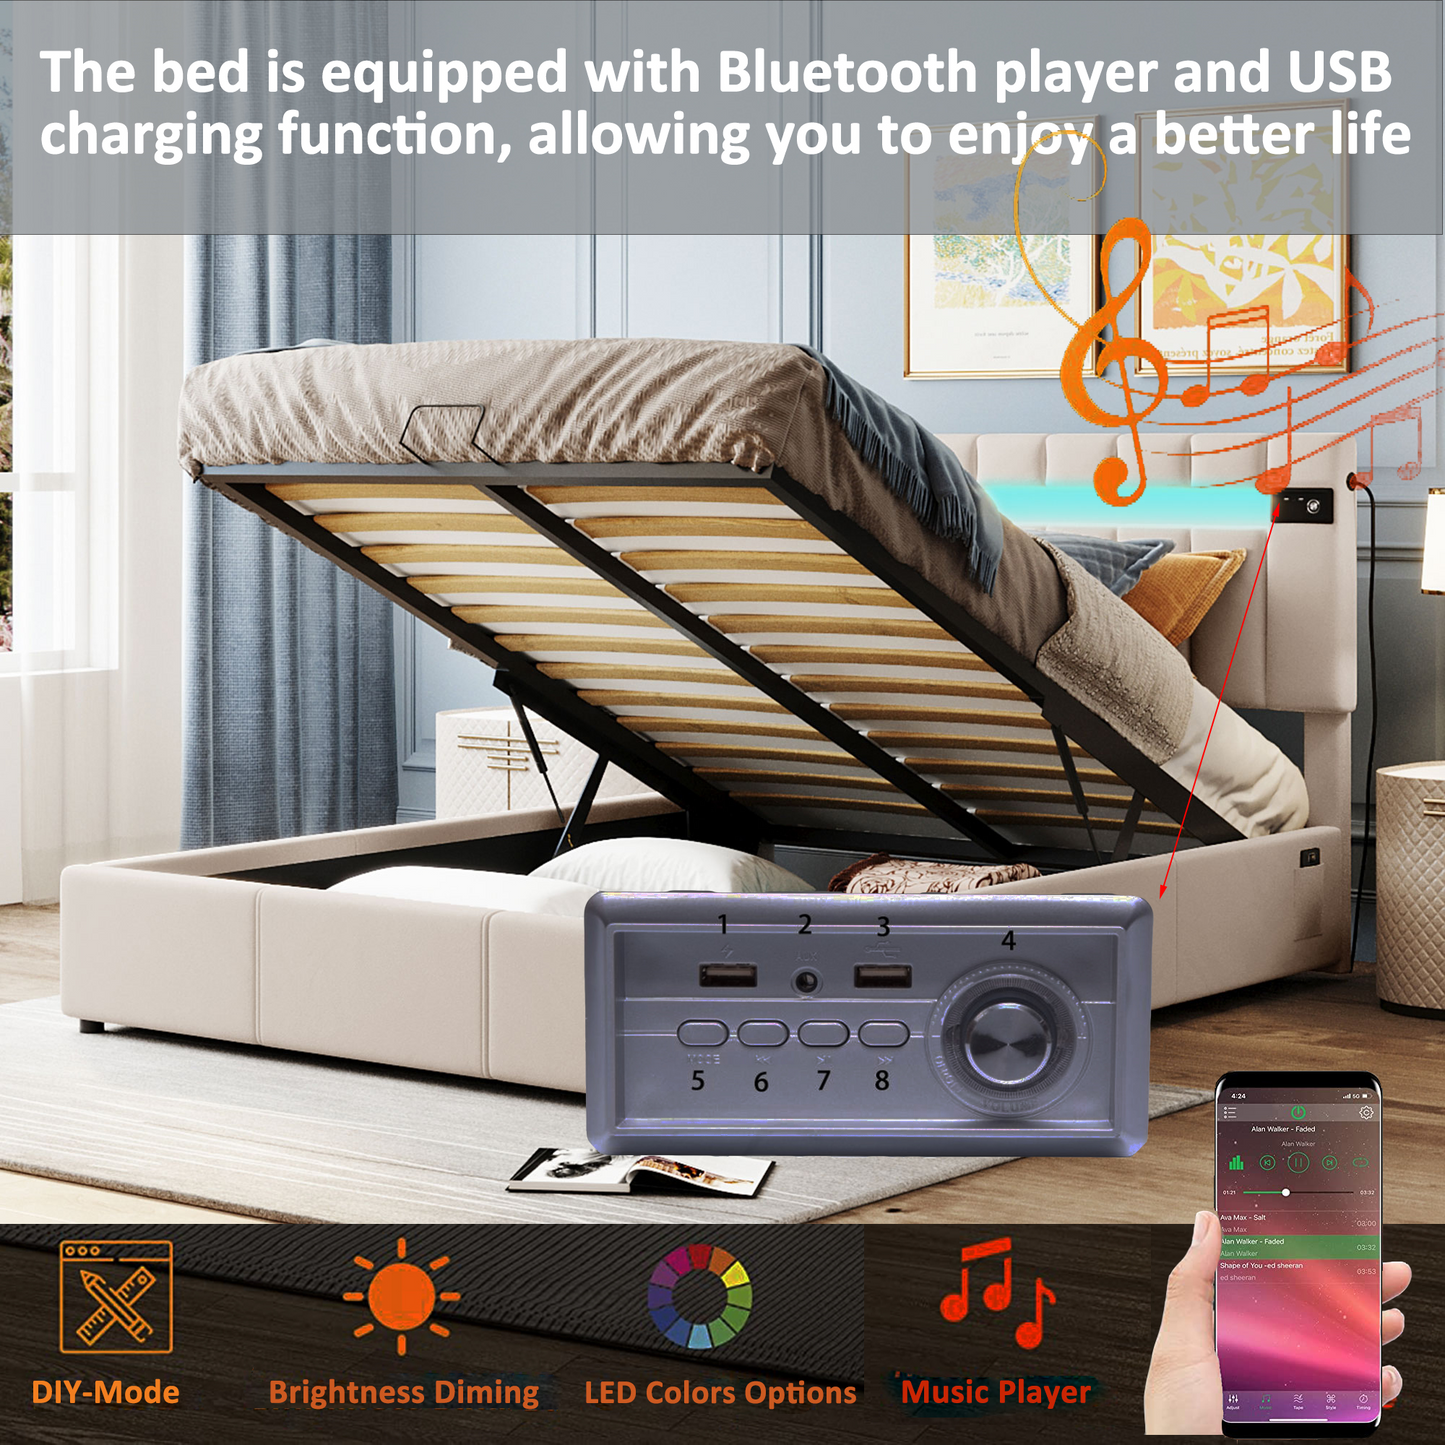 Queen Size Upholstered Platform Bed with LED light, Bluetooth Player and USB Charging, Hydraulic Storage Bed in Beige Velvet Fabric